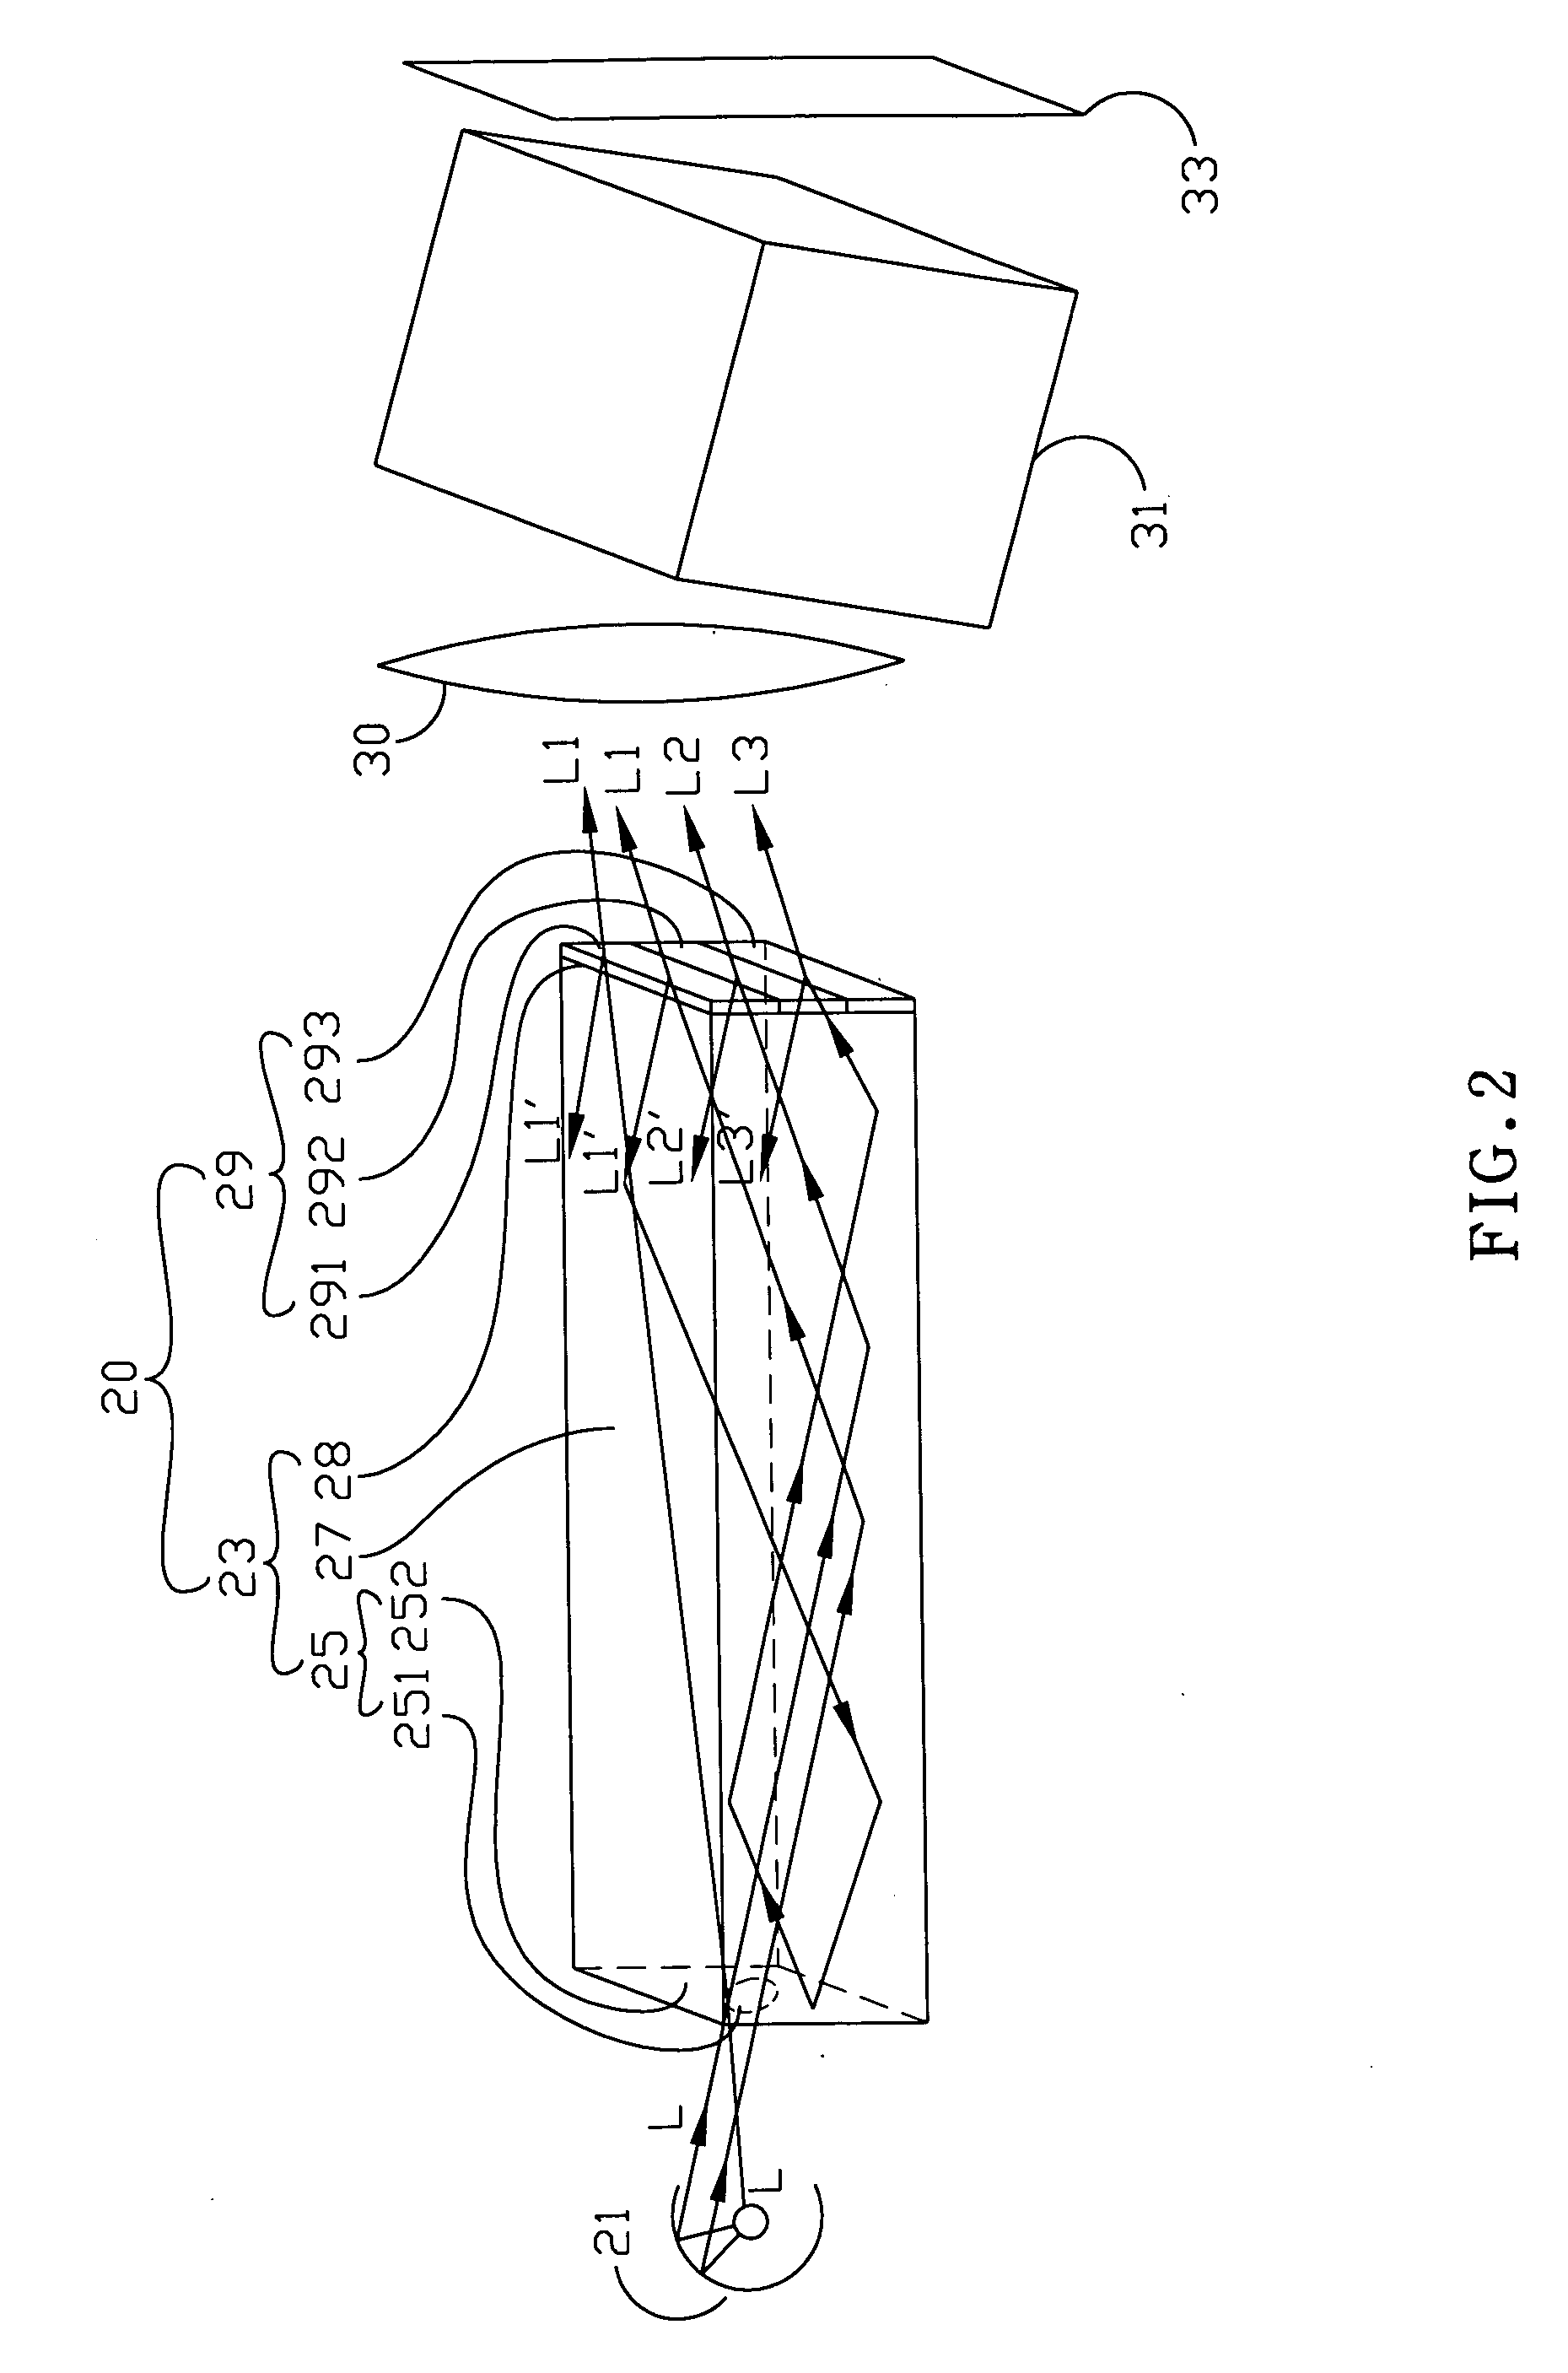 Optically integrated device